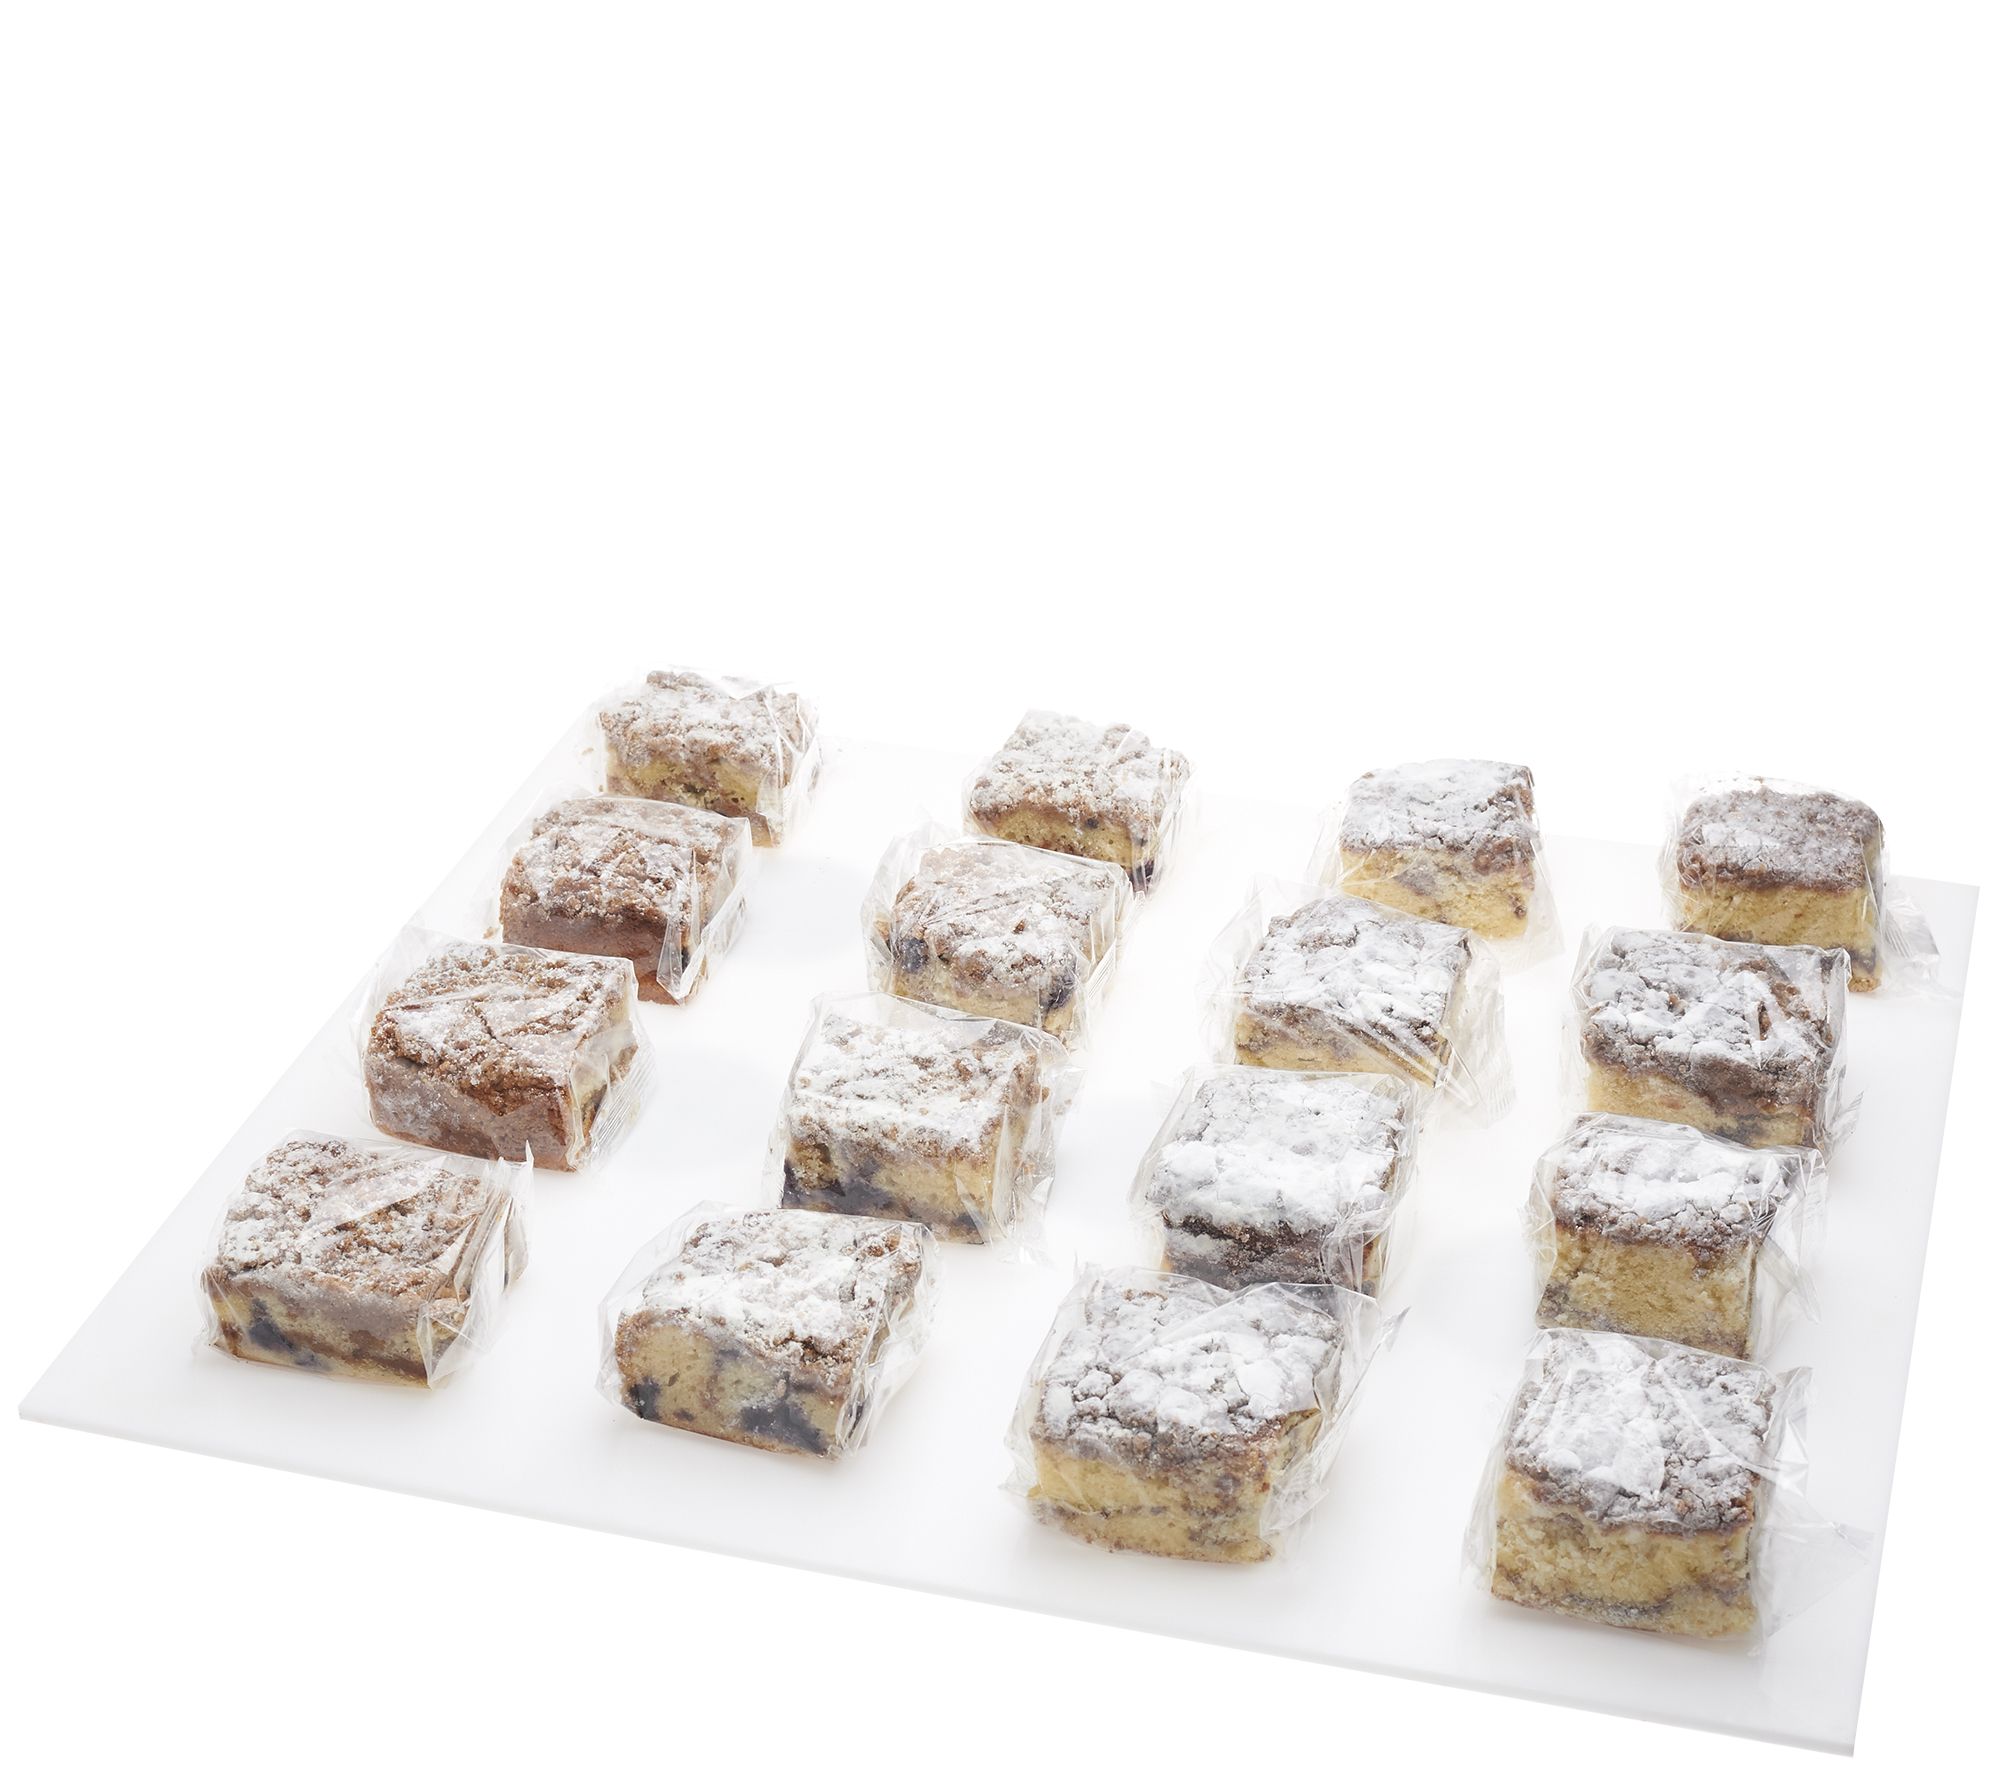 Jimmy The Baker 16 525 Oz Layered Crumb Cake Slices 